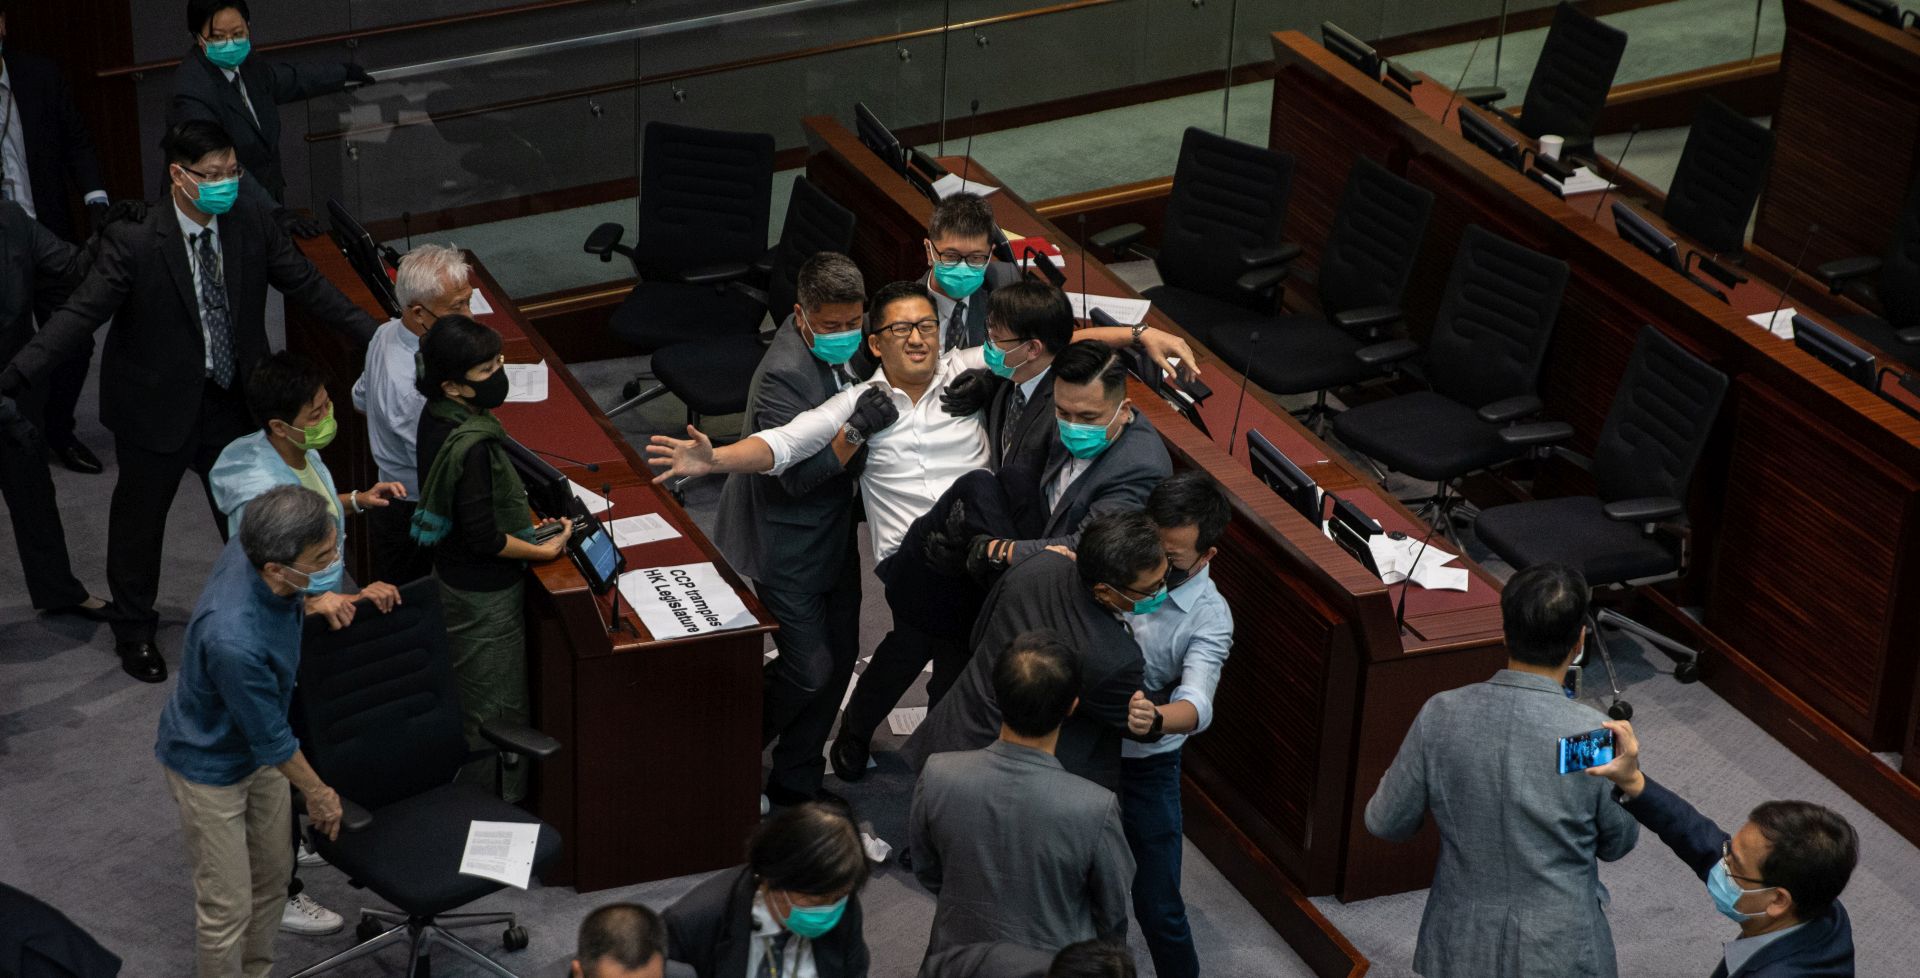 epa08428888 Pro-democracy lawmaker Lam Cheung-ting (top-C, in white shirt), is carried out of the chamber by security guards during a scuffle with pro-Beijing lawmakers at a the Legislative Council meeting in Hong Kong, China, 18 May 2020. Several pro-democracy legislators were dragged out of the chamber by security guards as the two camps tussled for control of the House Committee which has been gridlocked for months. The pro-establishment camp called the vote, after most of the pan-democratic lawmakers had been dragged out of the room by security guards after the meeting descended into utter chaos.  EPA/JEROME FAVRE